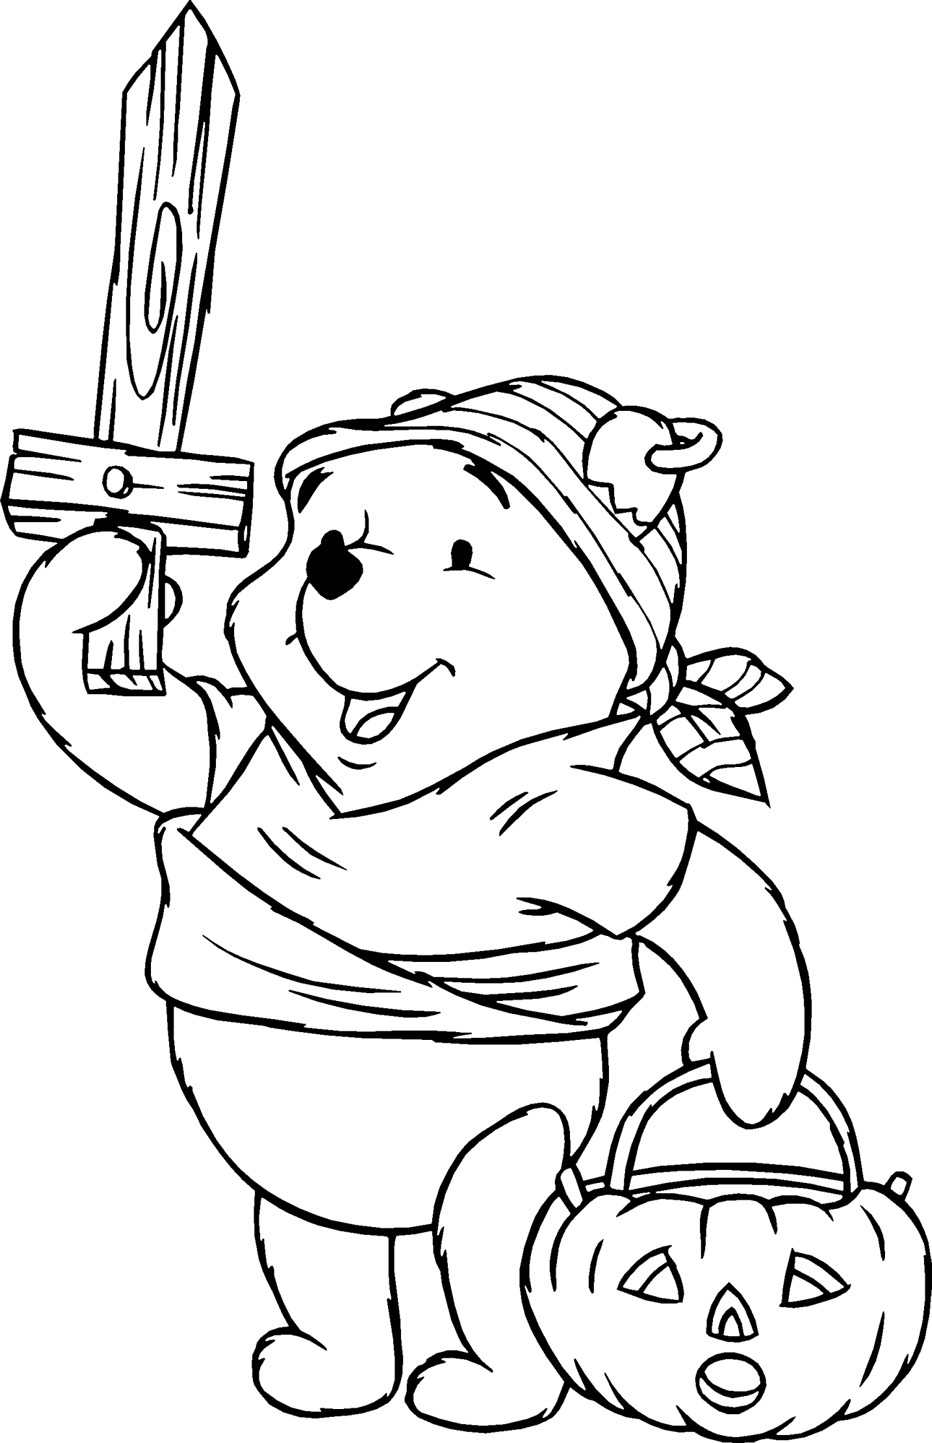  Free Disney Halloween Coloring Pages 6